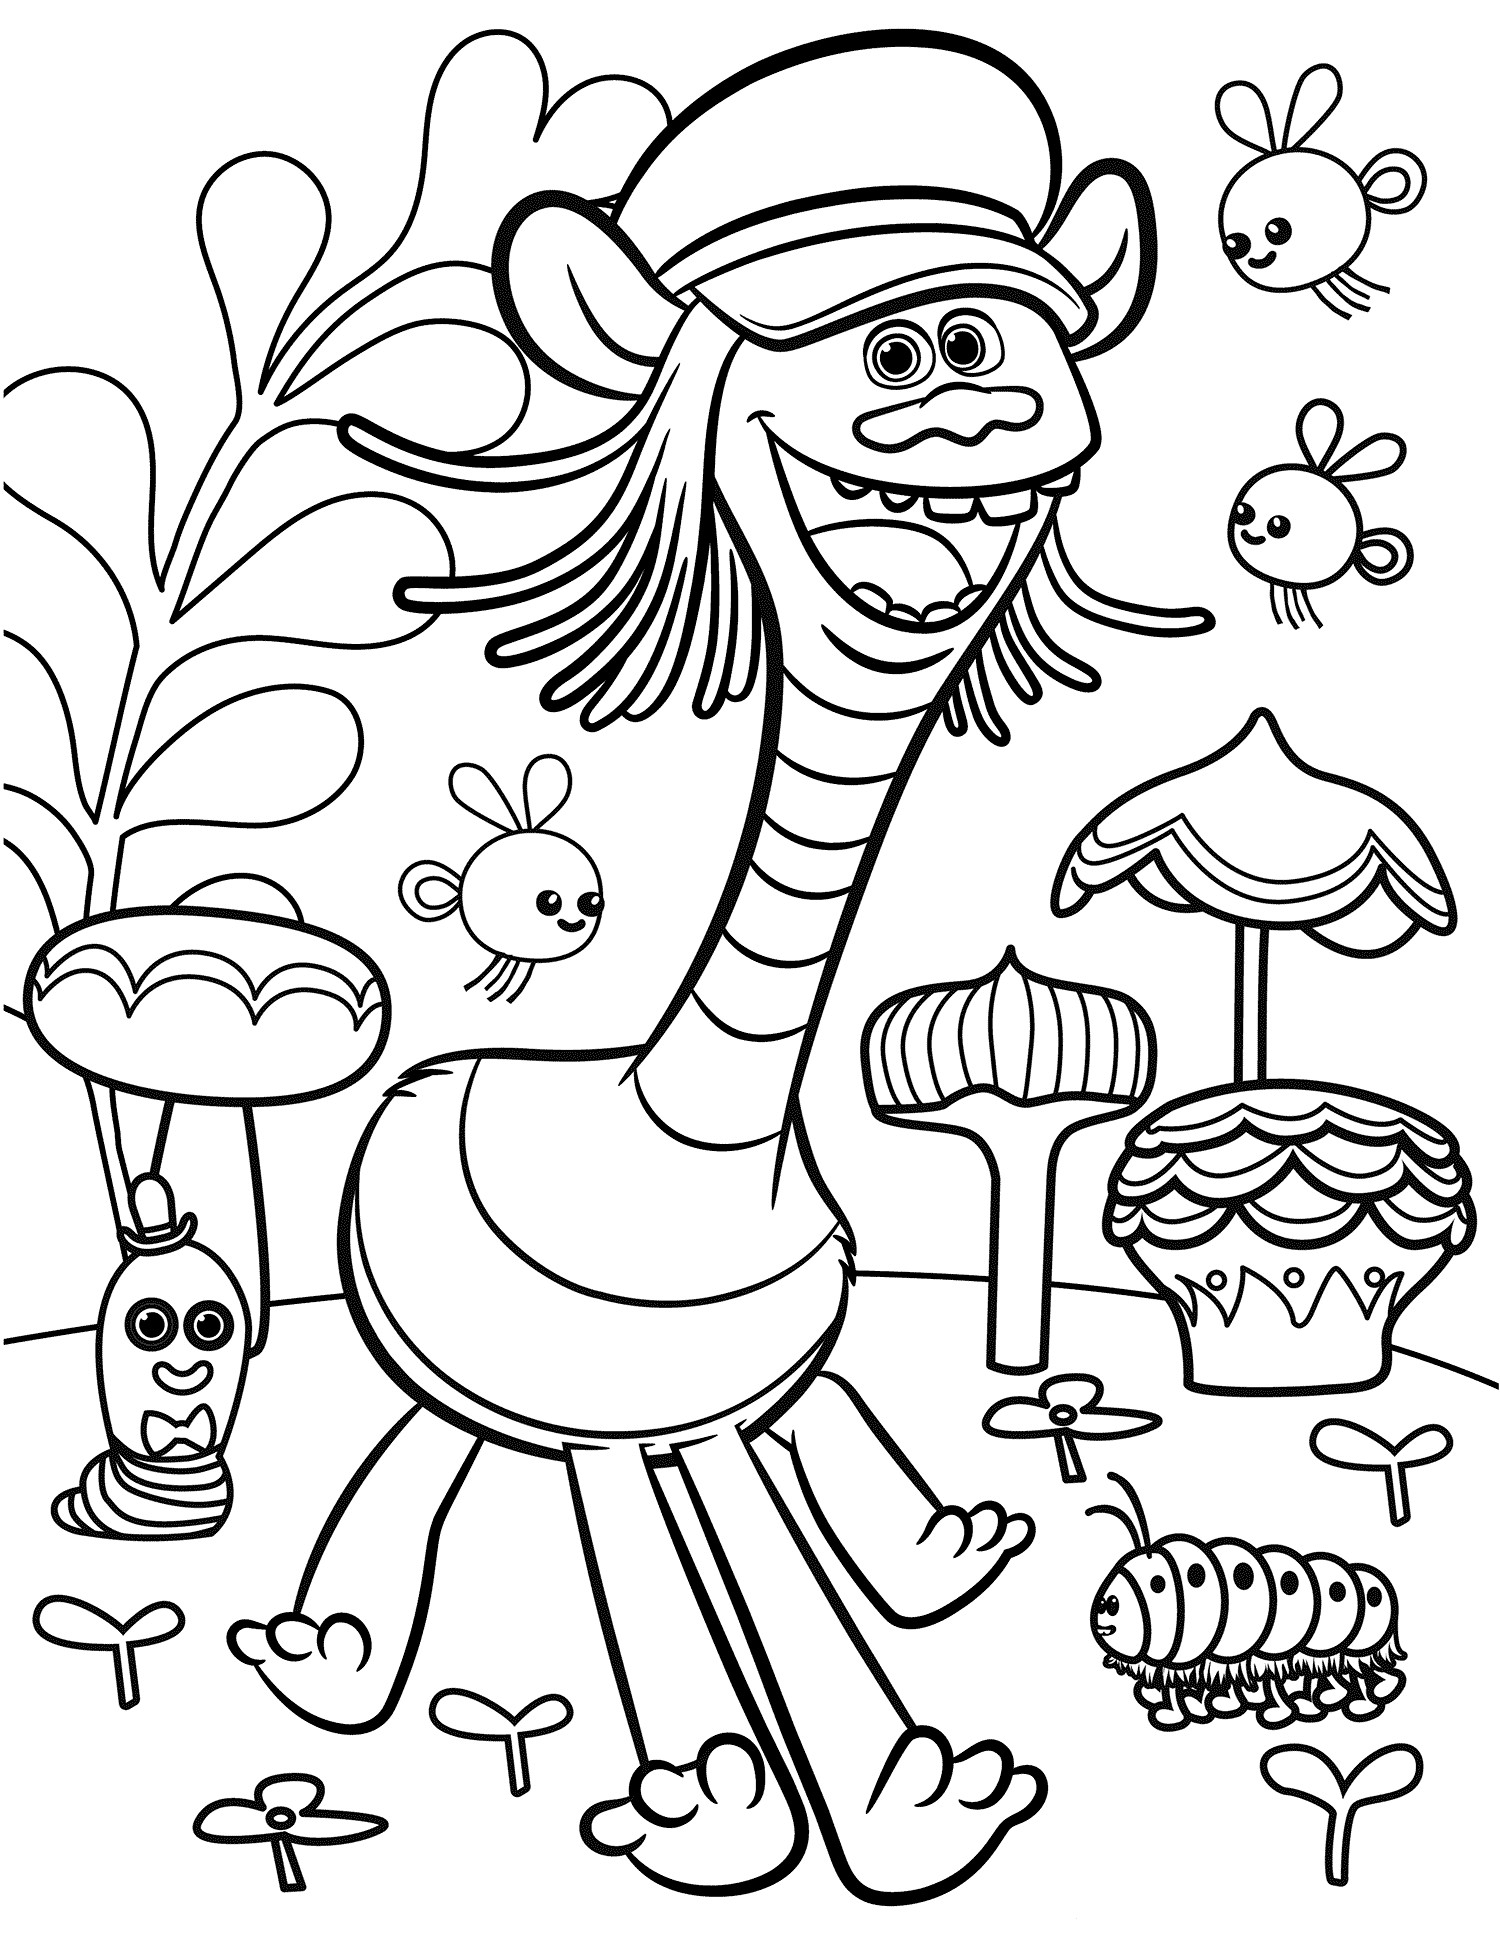 Coloring Pages Trolls
 Trolls Movie Coloring Pages Best Coloring Pages For Kids